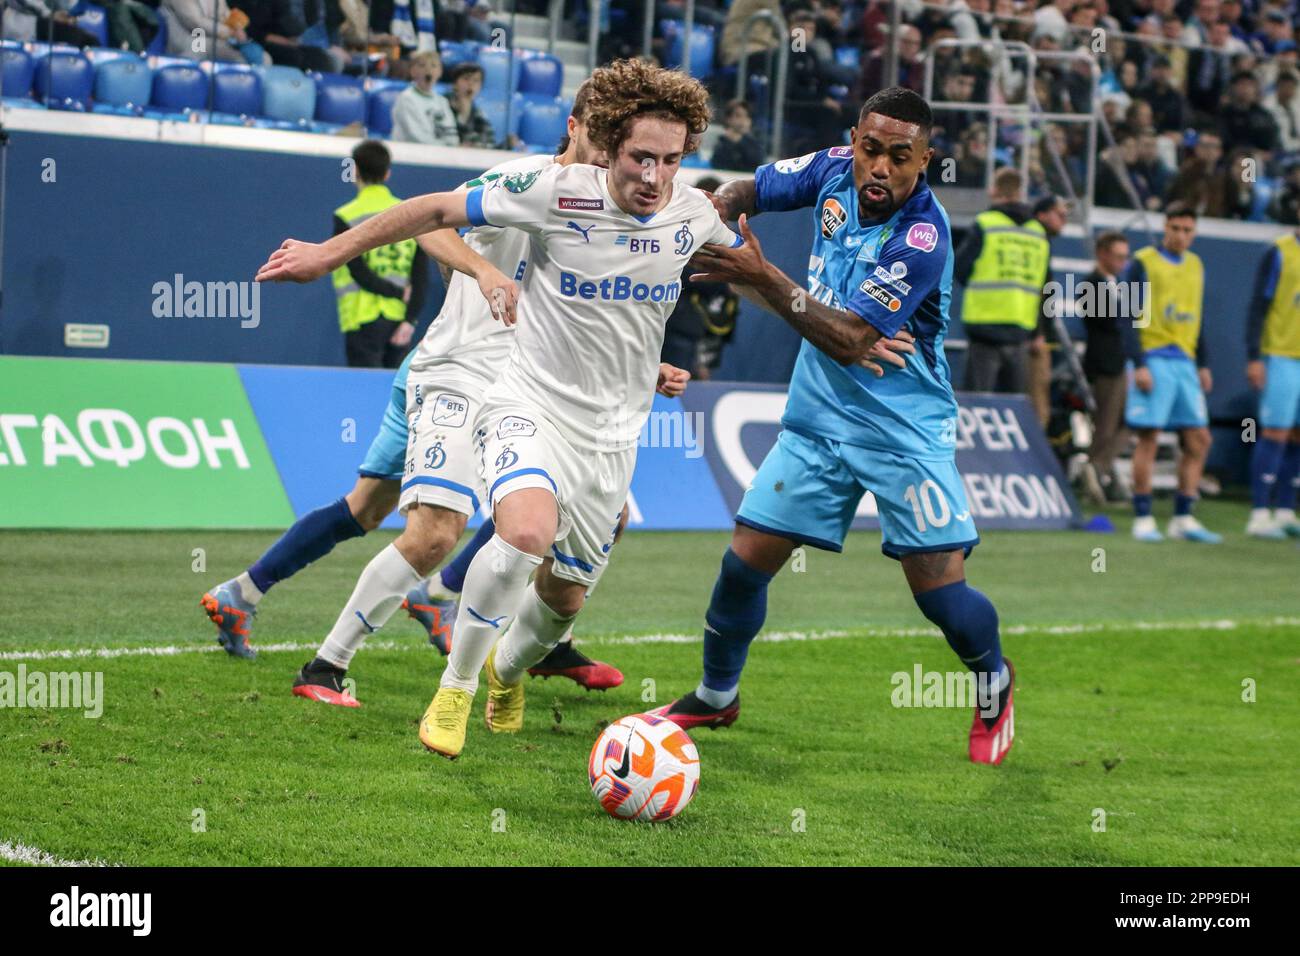 Saint Petersburg, Russia. 22nd Apr, 2023. Luka Gagnidze (No.34) of Dynamo and Malcom Filipe Silva de Oliveira, commonly known as Malcom (No.10) of Zenit in action during the Russian Premier League football match between Zenit Saint Petersburg and Dynamo Moscow at Gazprom Arena. Zenit 3:1 Dynamo. (Photo by Maksim Konstantinov/SOPA Images/Sipa USA) Credit: Sipa USA/Alamy Live News Stock Photo